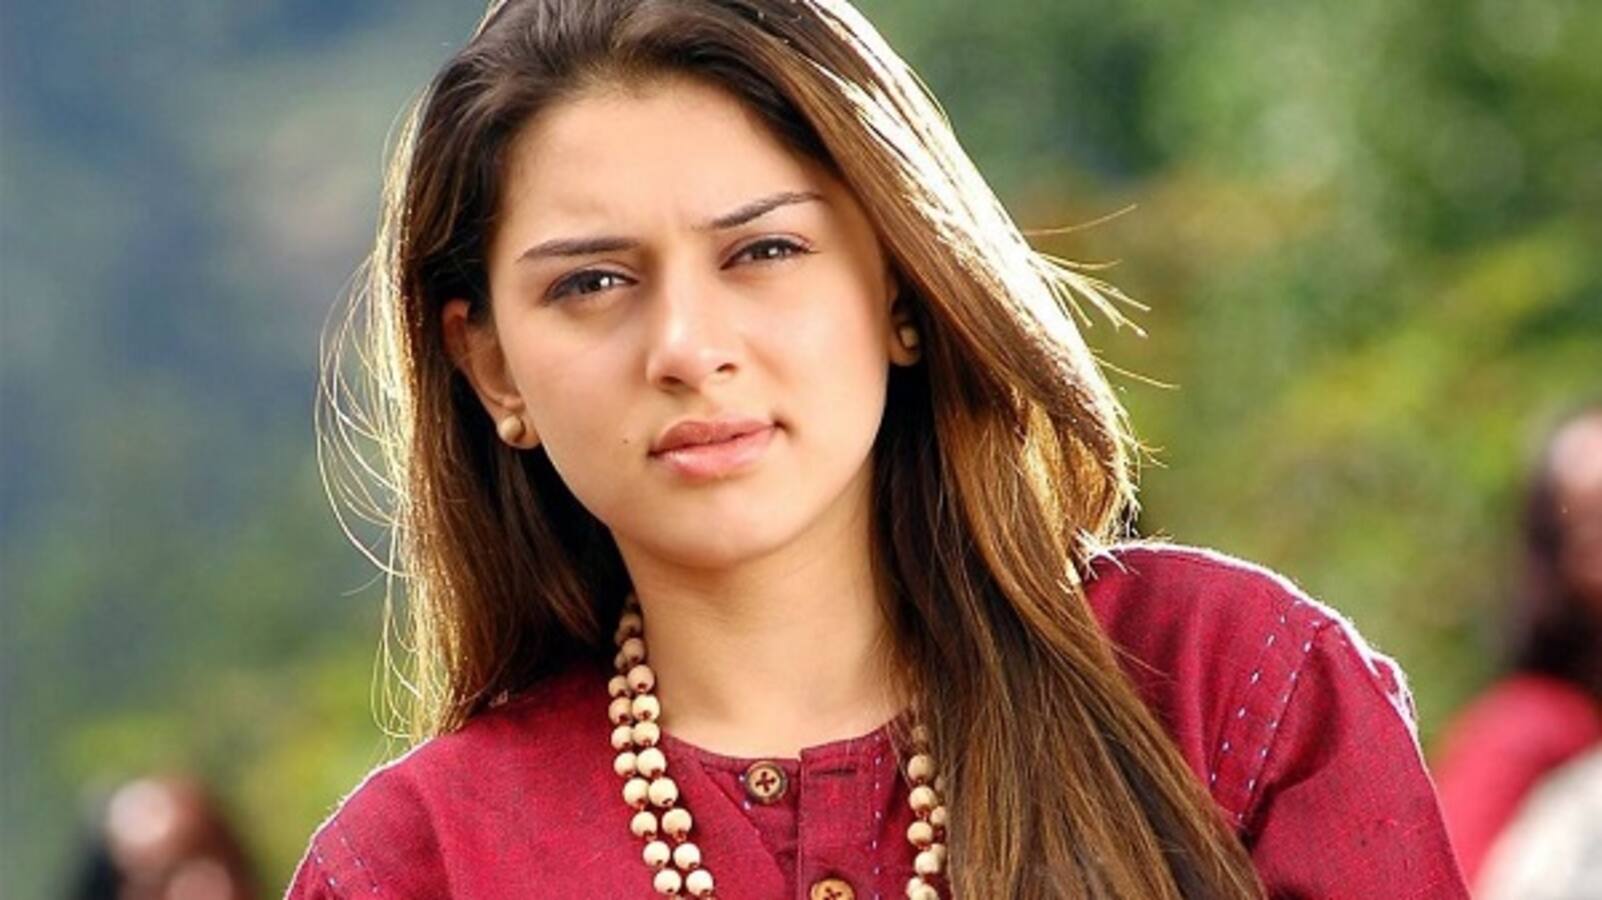 Hansika Motwani has posted a hillarious video and you cannot miss it!